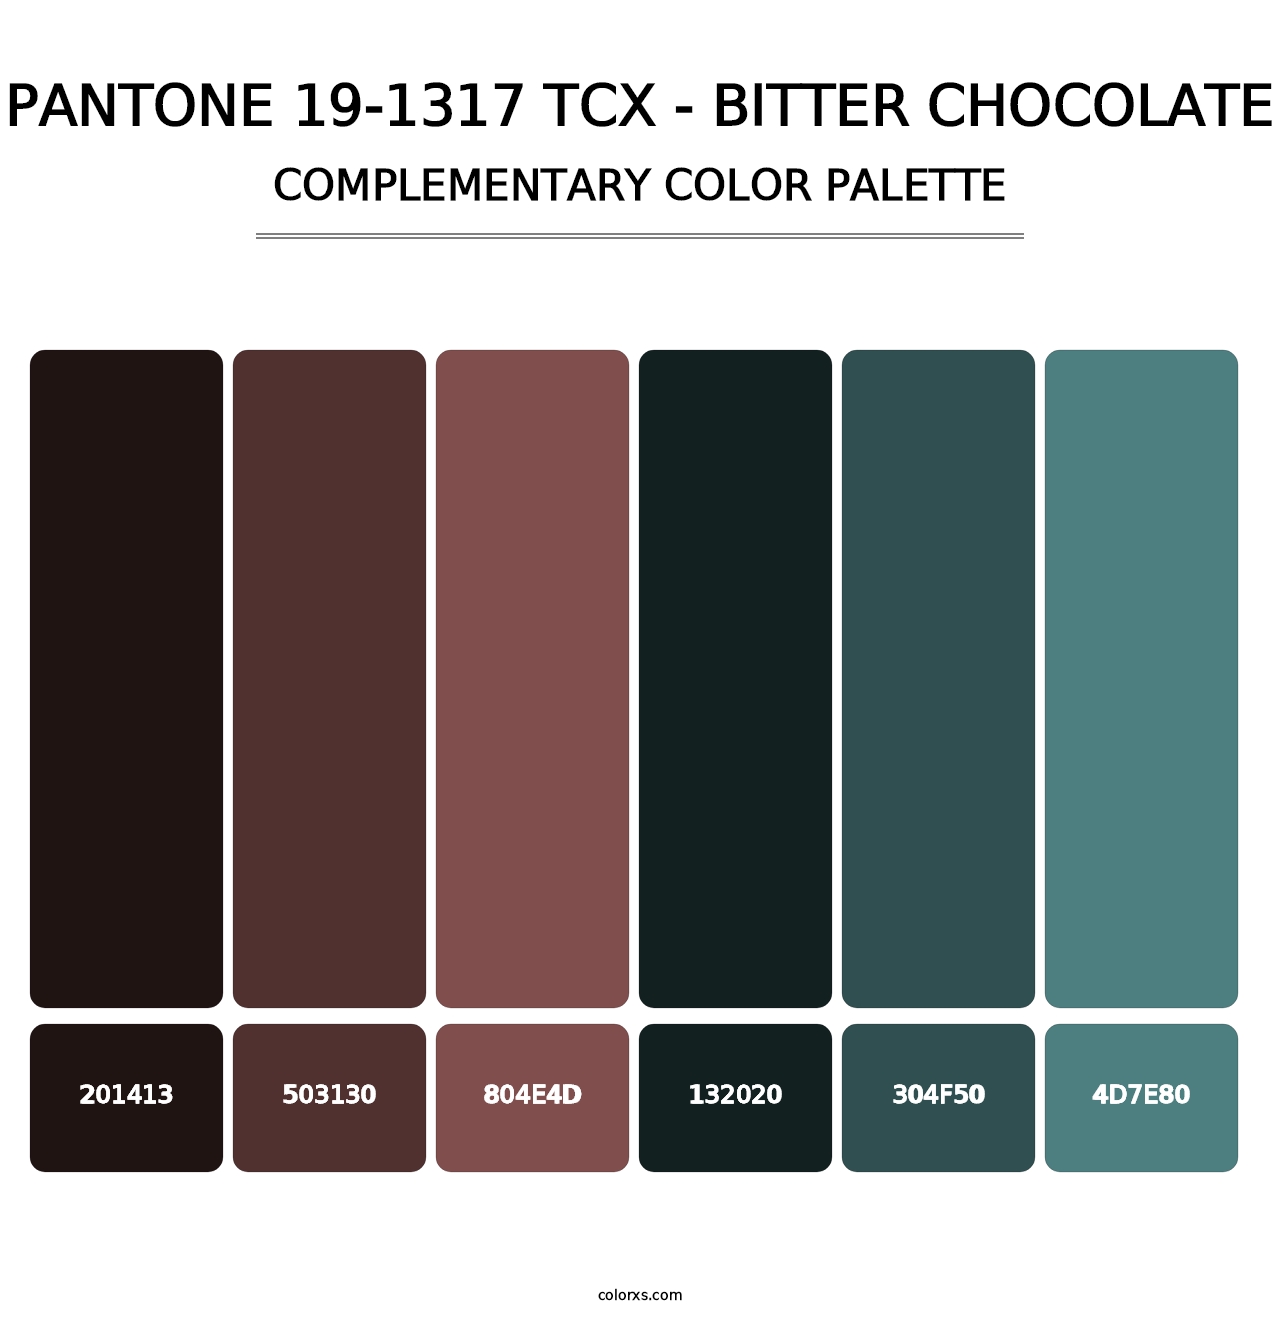 PANTONE 19-1317 TCX - Bitter Chocolate - Complementary Color Palette